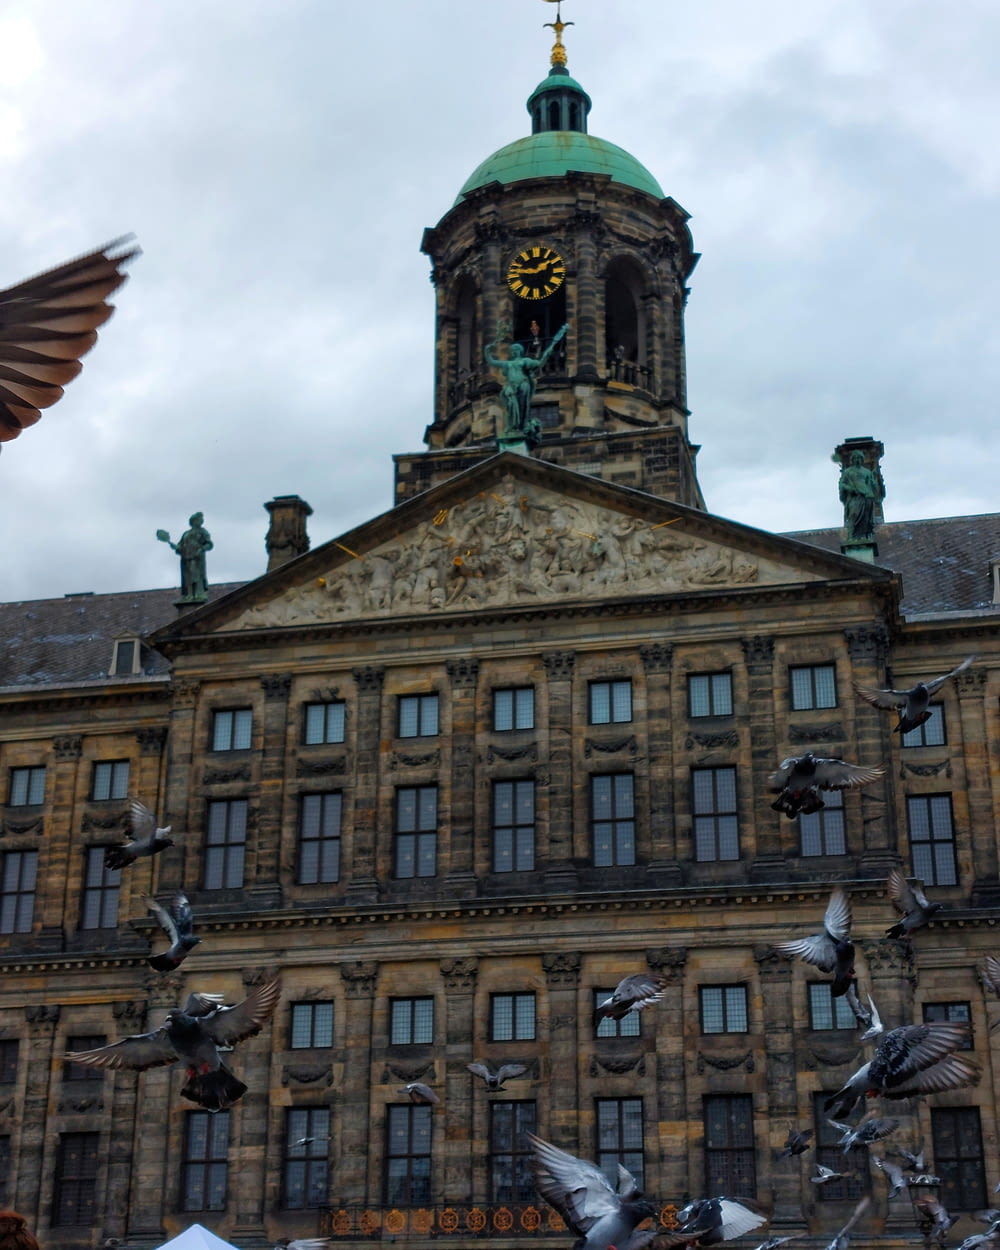 a clock tower on top of Royal Palace of Amsterdam